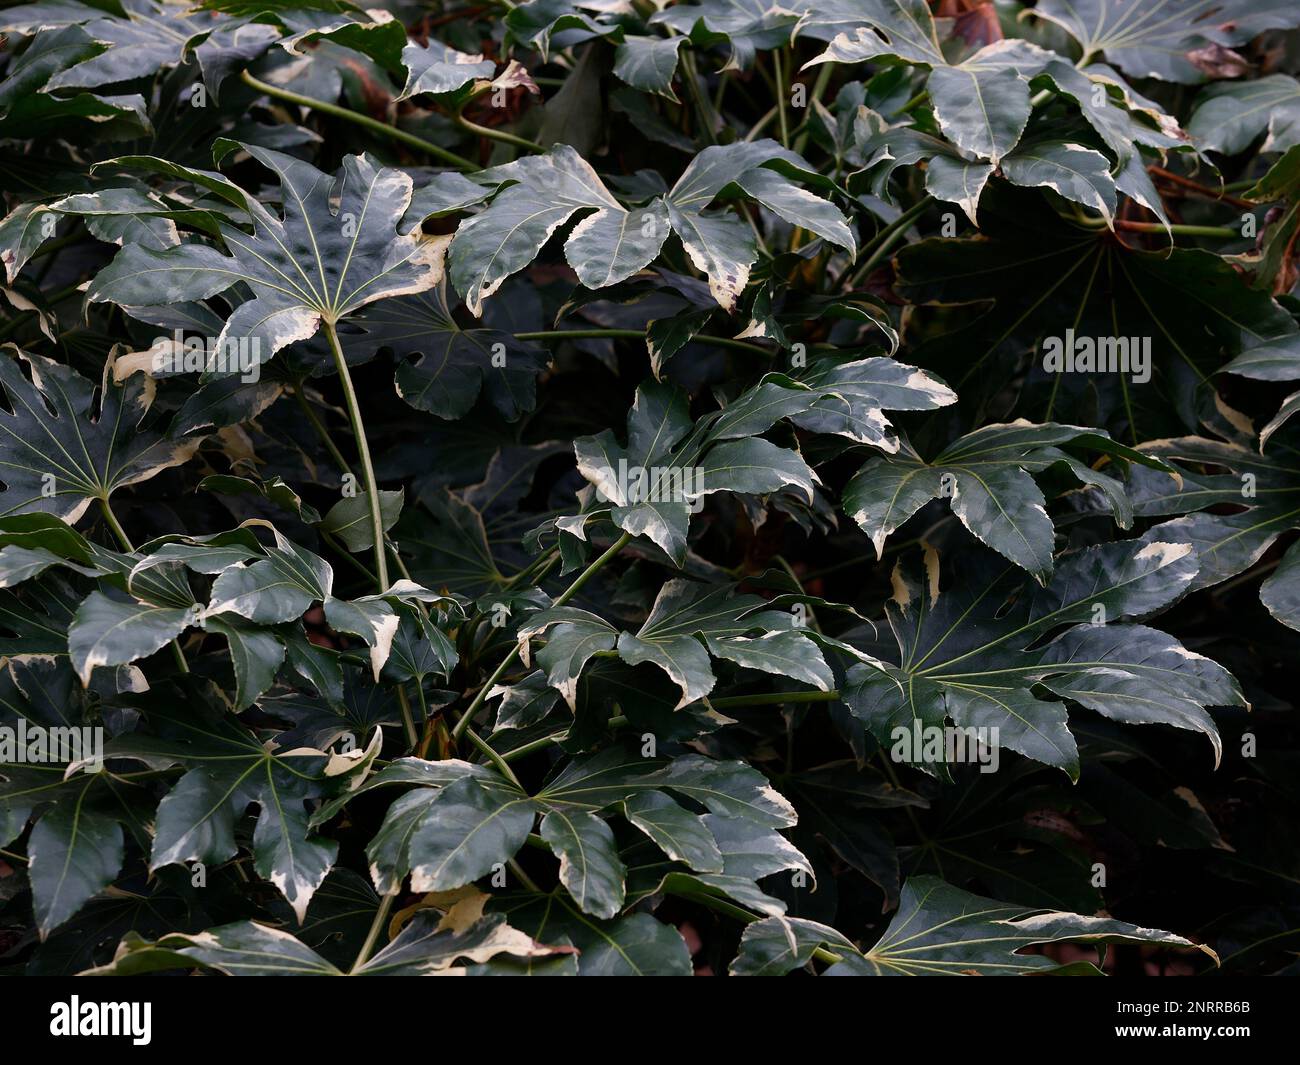 Closeup of the white and green variegated leaves of the evergreen garden shrub Fatsia japonica variegata. Stock Photo